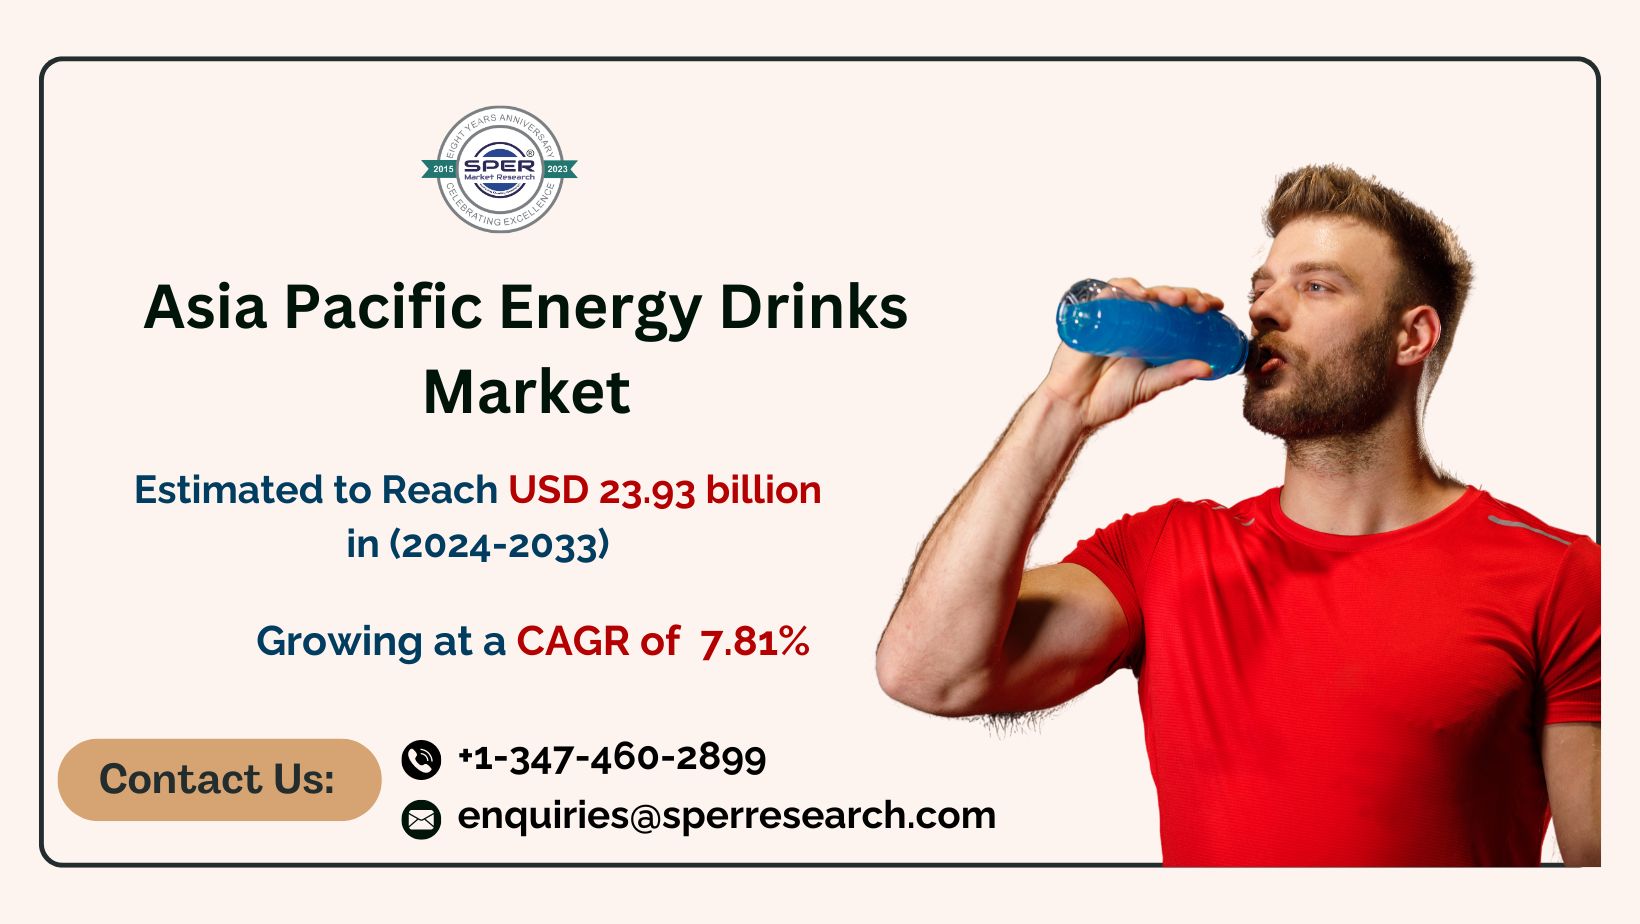 Asia Pacific Energy Drinks Market